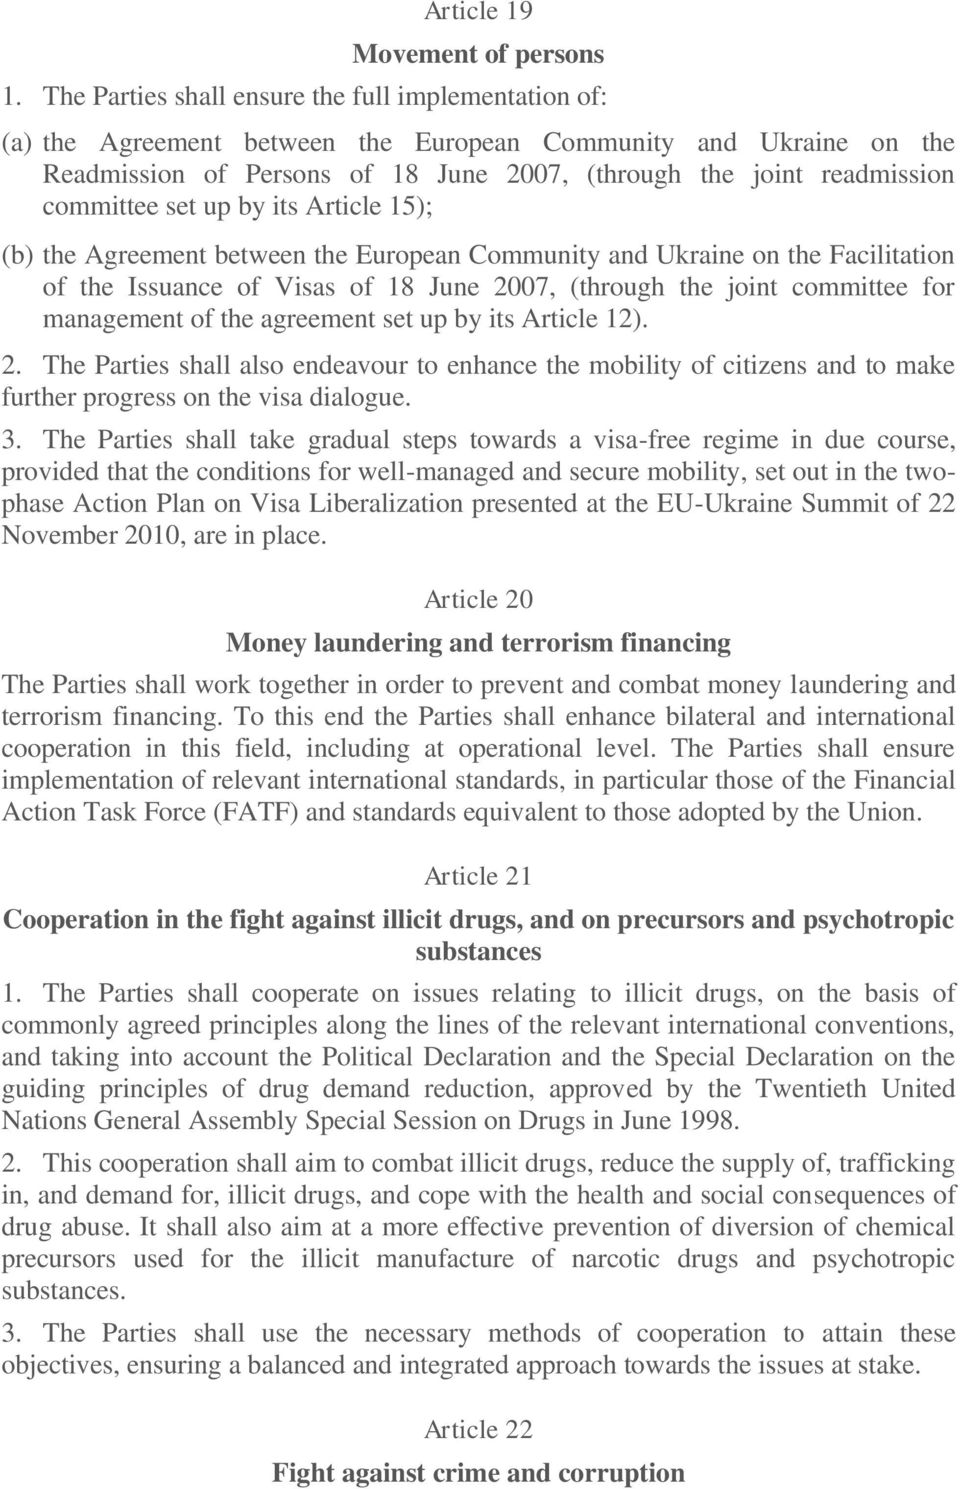 committee set up by its Article 15); (b) the Agreement between the European Community and Ukraine on the Facilitation of the Issuance of Visas of 18 June 2007, (through the joint committee for